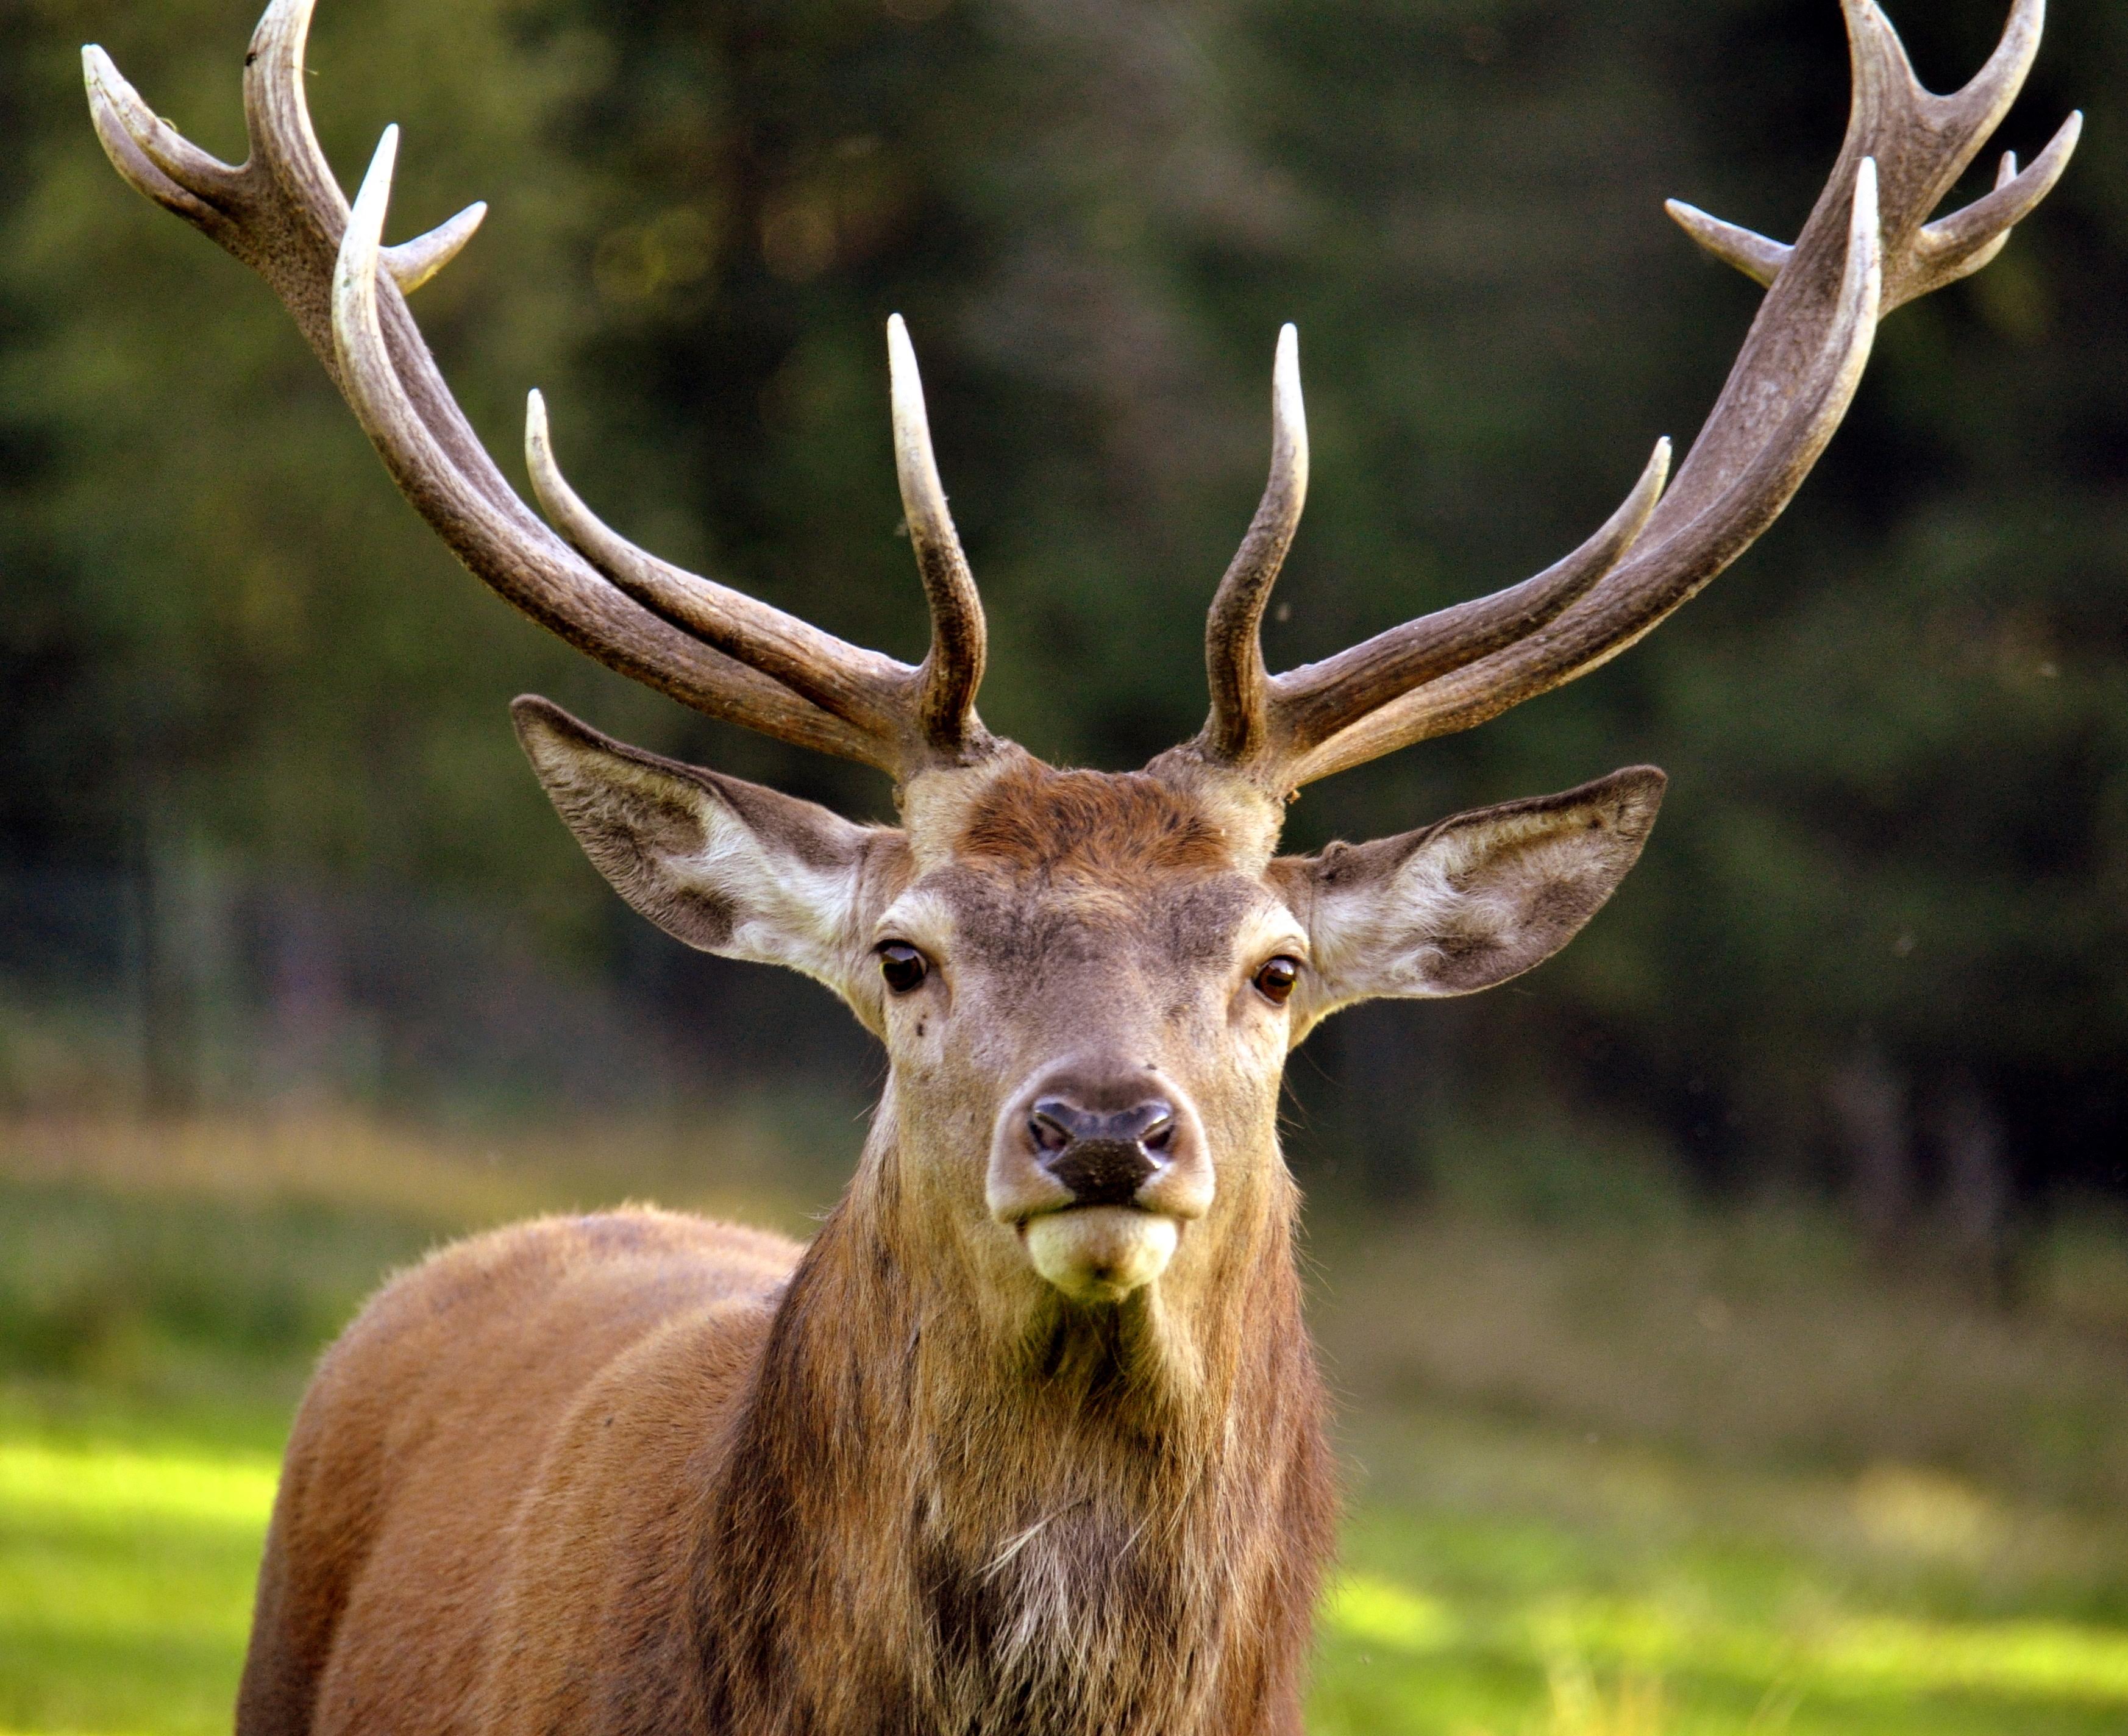 Large male deer with antlers, head and chest.